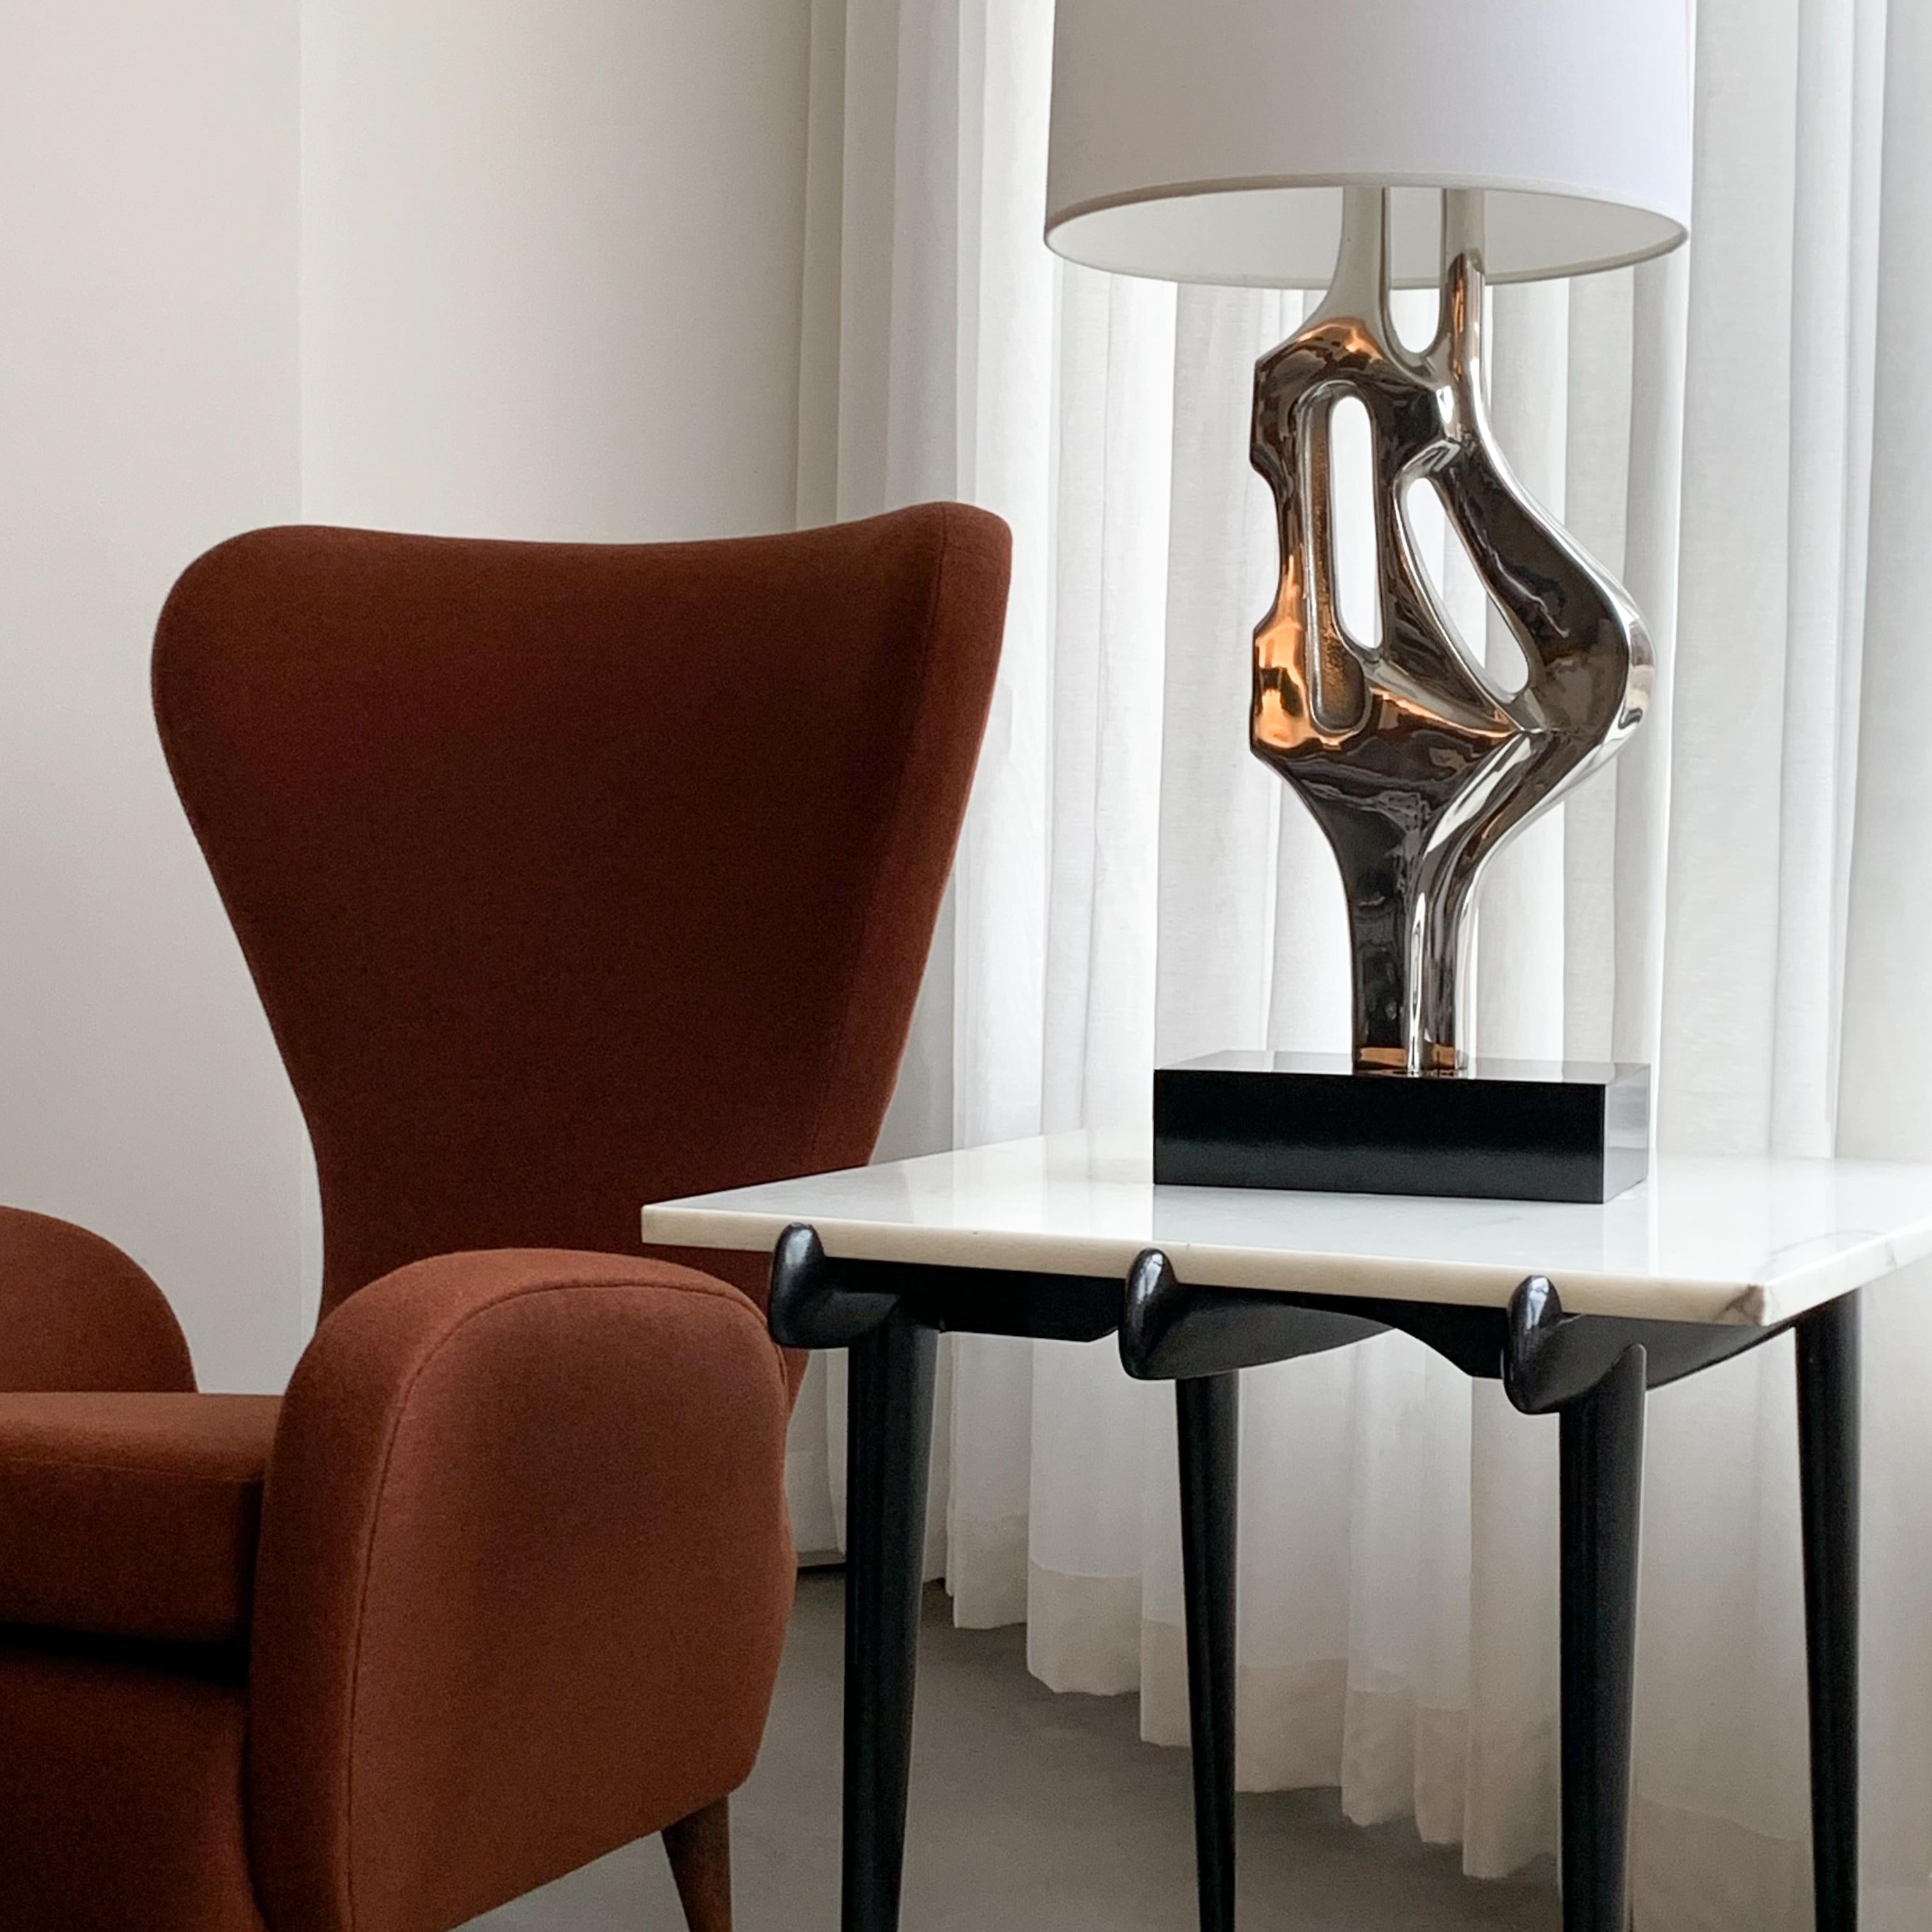 Incredible sculptural abstract table lamp in the style of Alain Chervet, France circa 1970s. Nickel plated modernist abstract sculpture mounted to a rectangular black laminate base. Black base measures 2.5